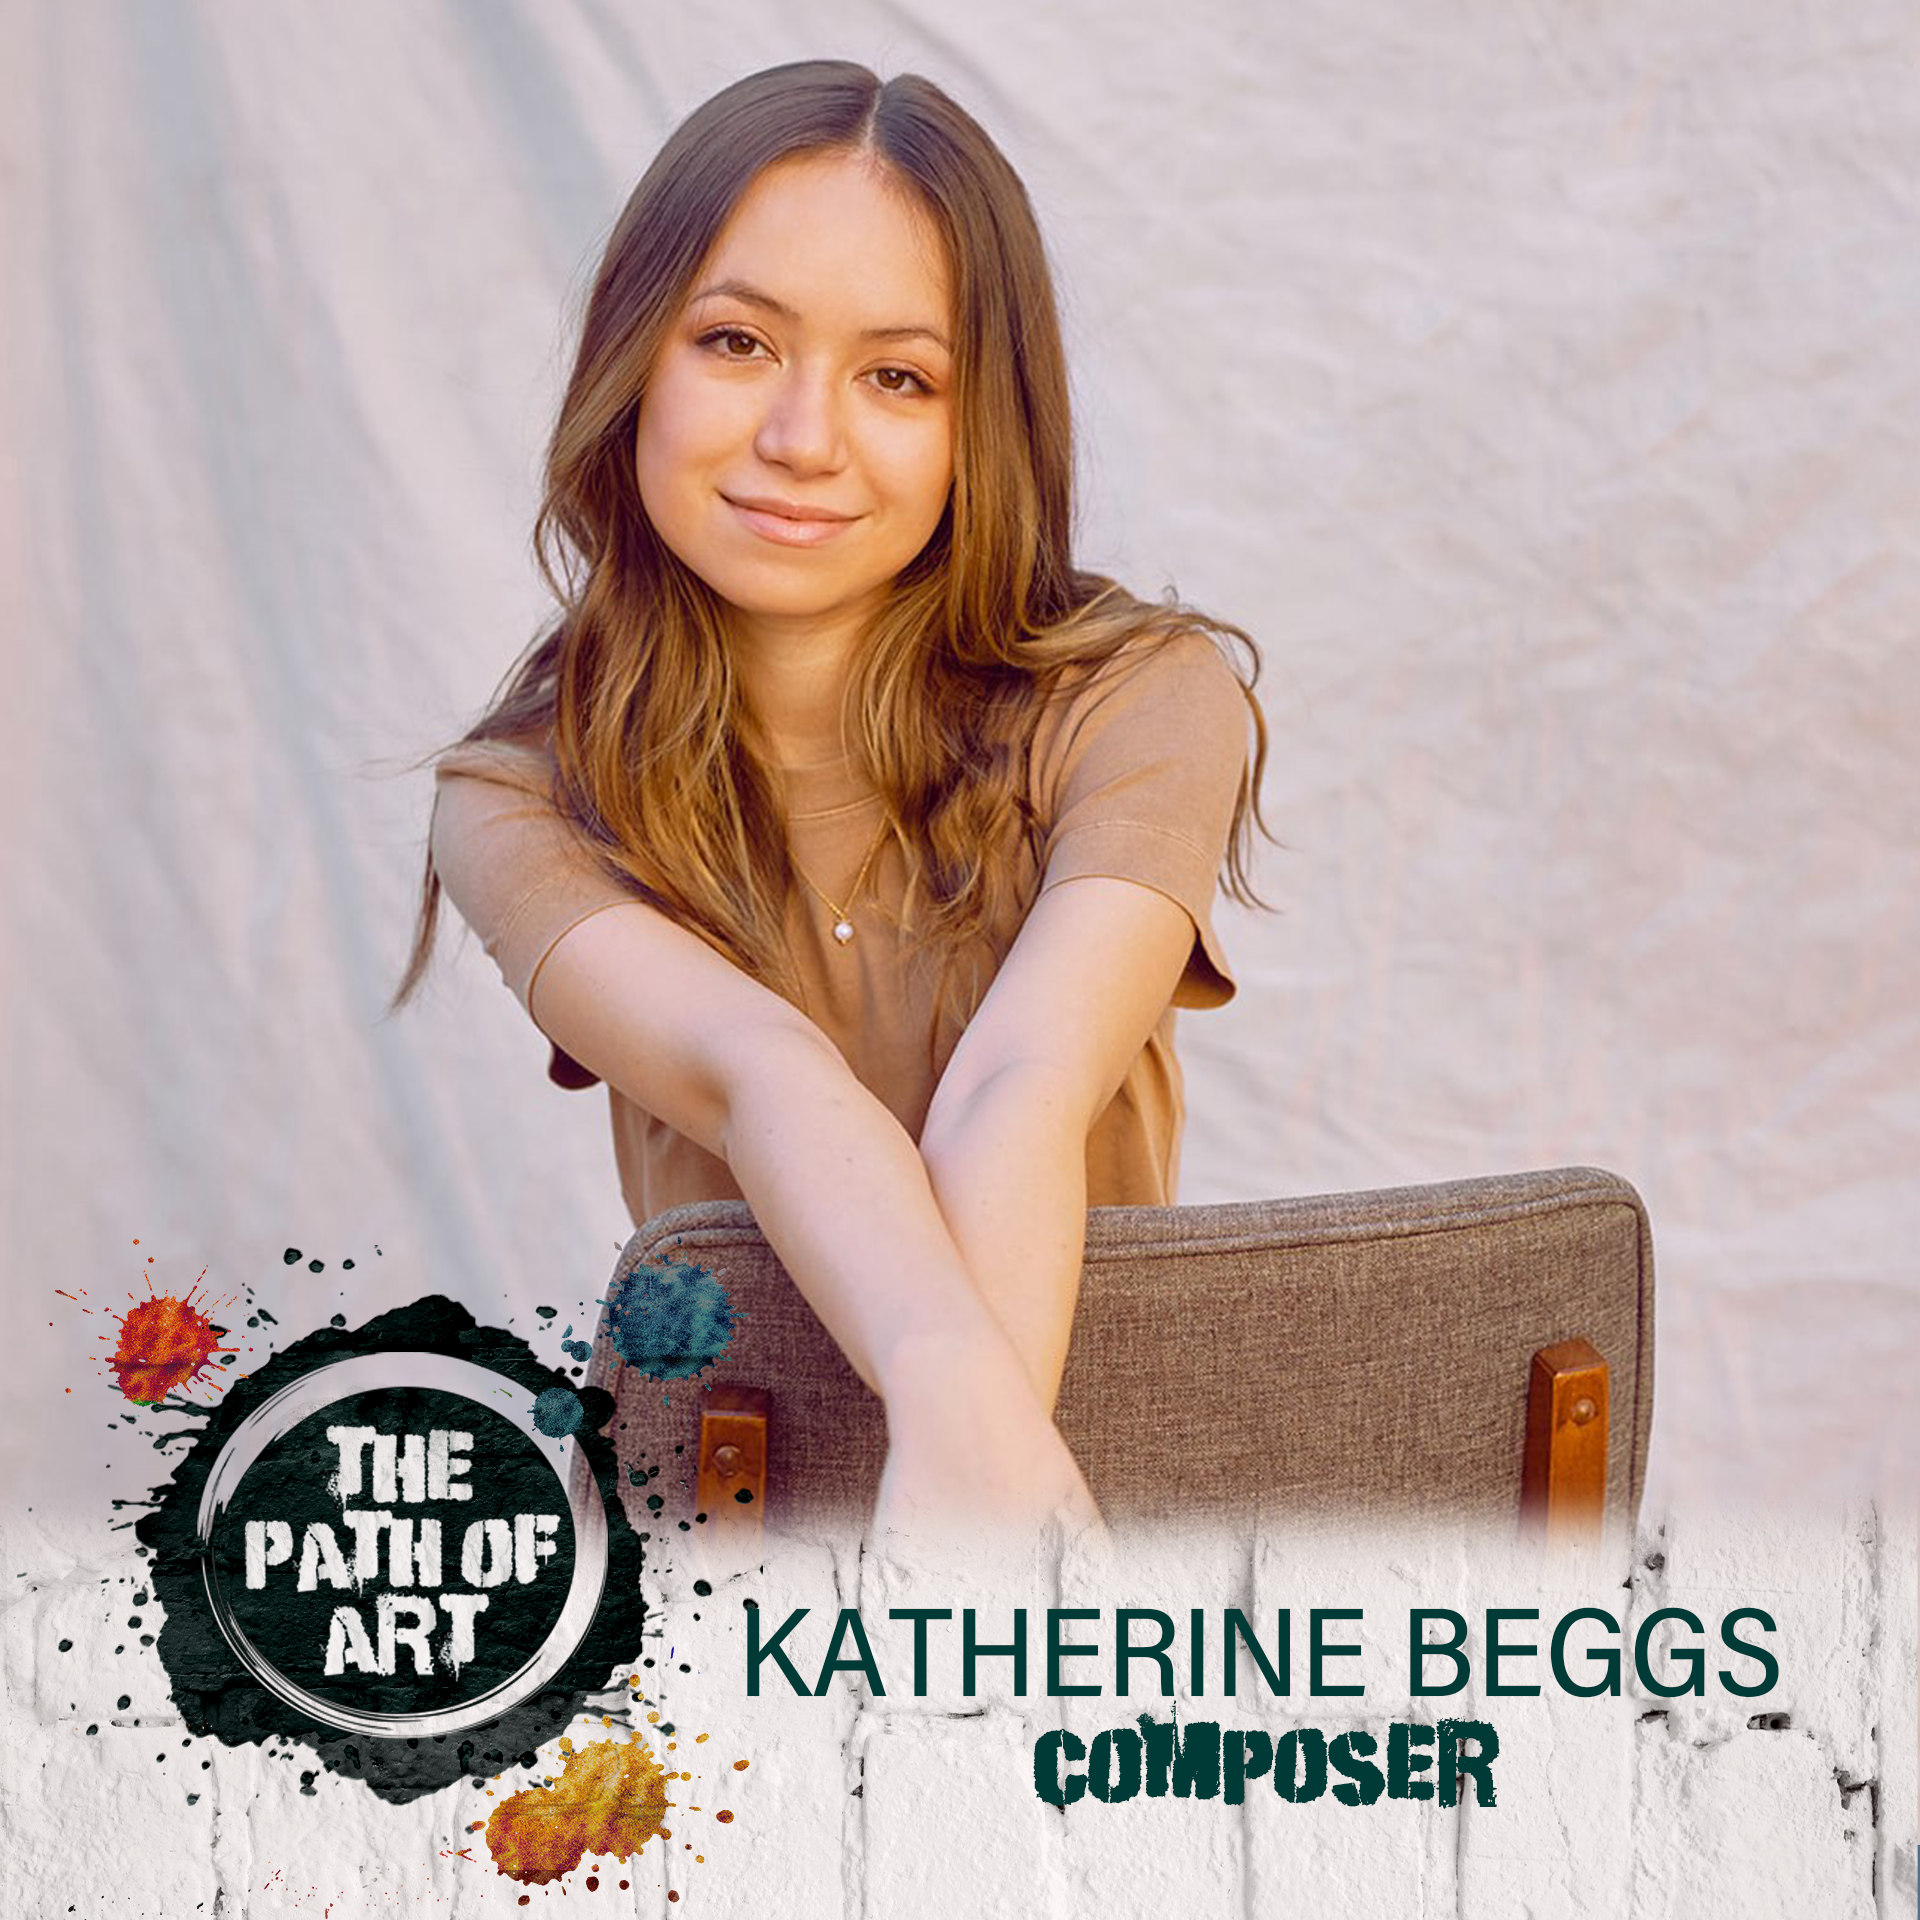 #17 Katherine Beggs: Learn to accept yourself